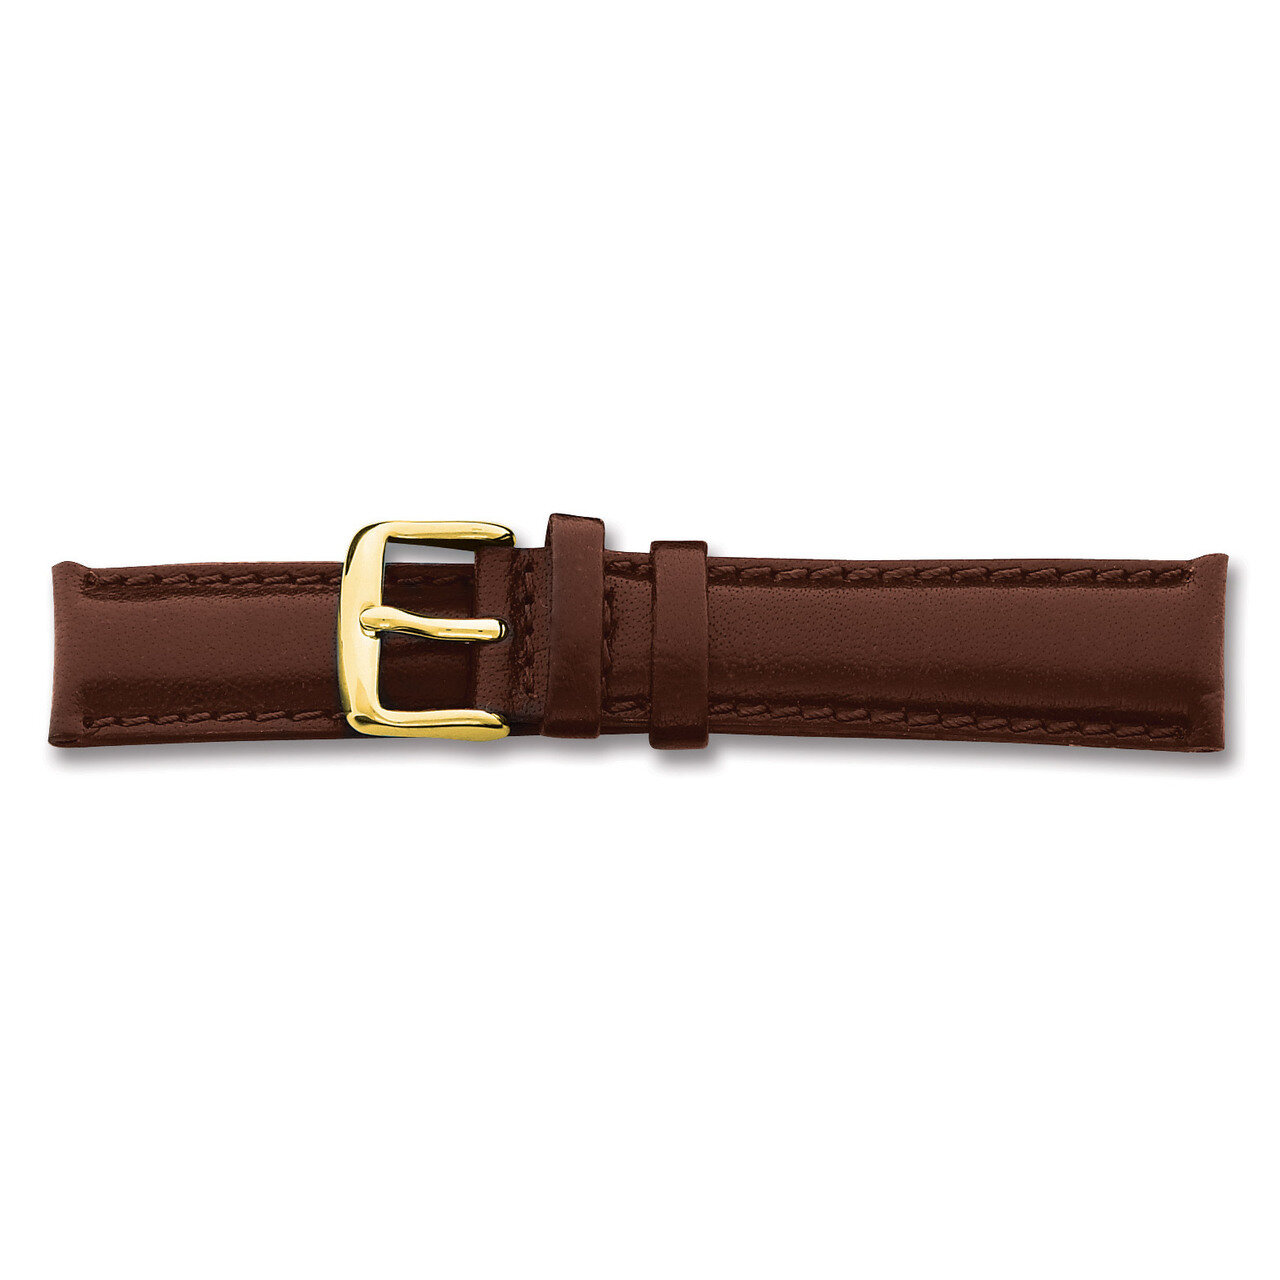 19mm Brown Smooth Leather Chrono Buckle Watch Band 7.5 Inch Gold-tone BAY140-19